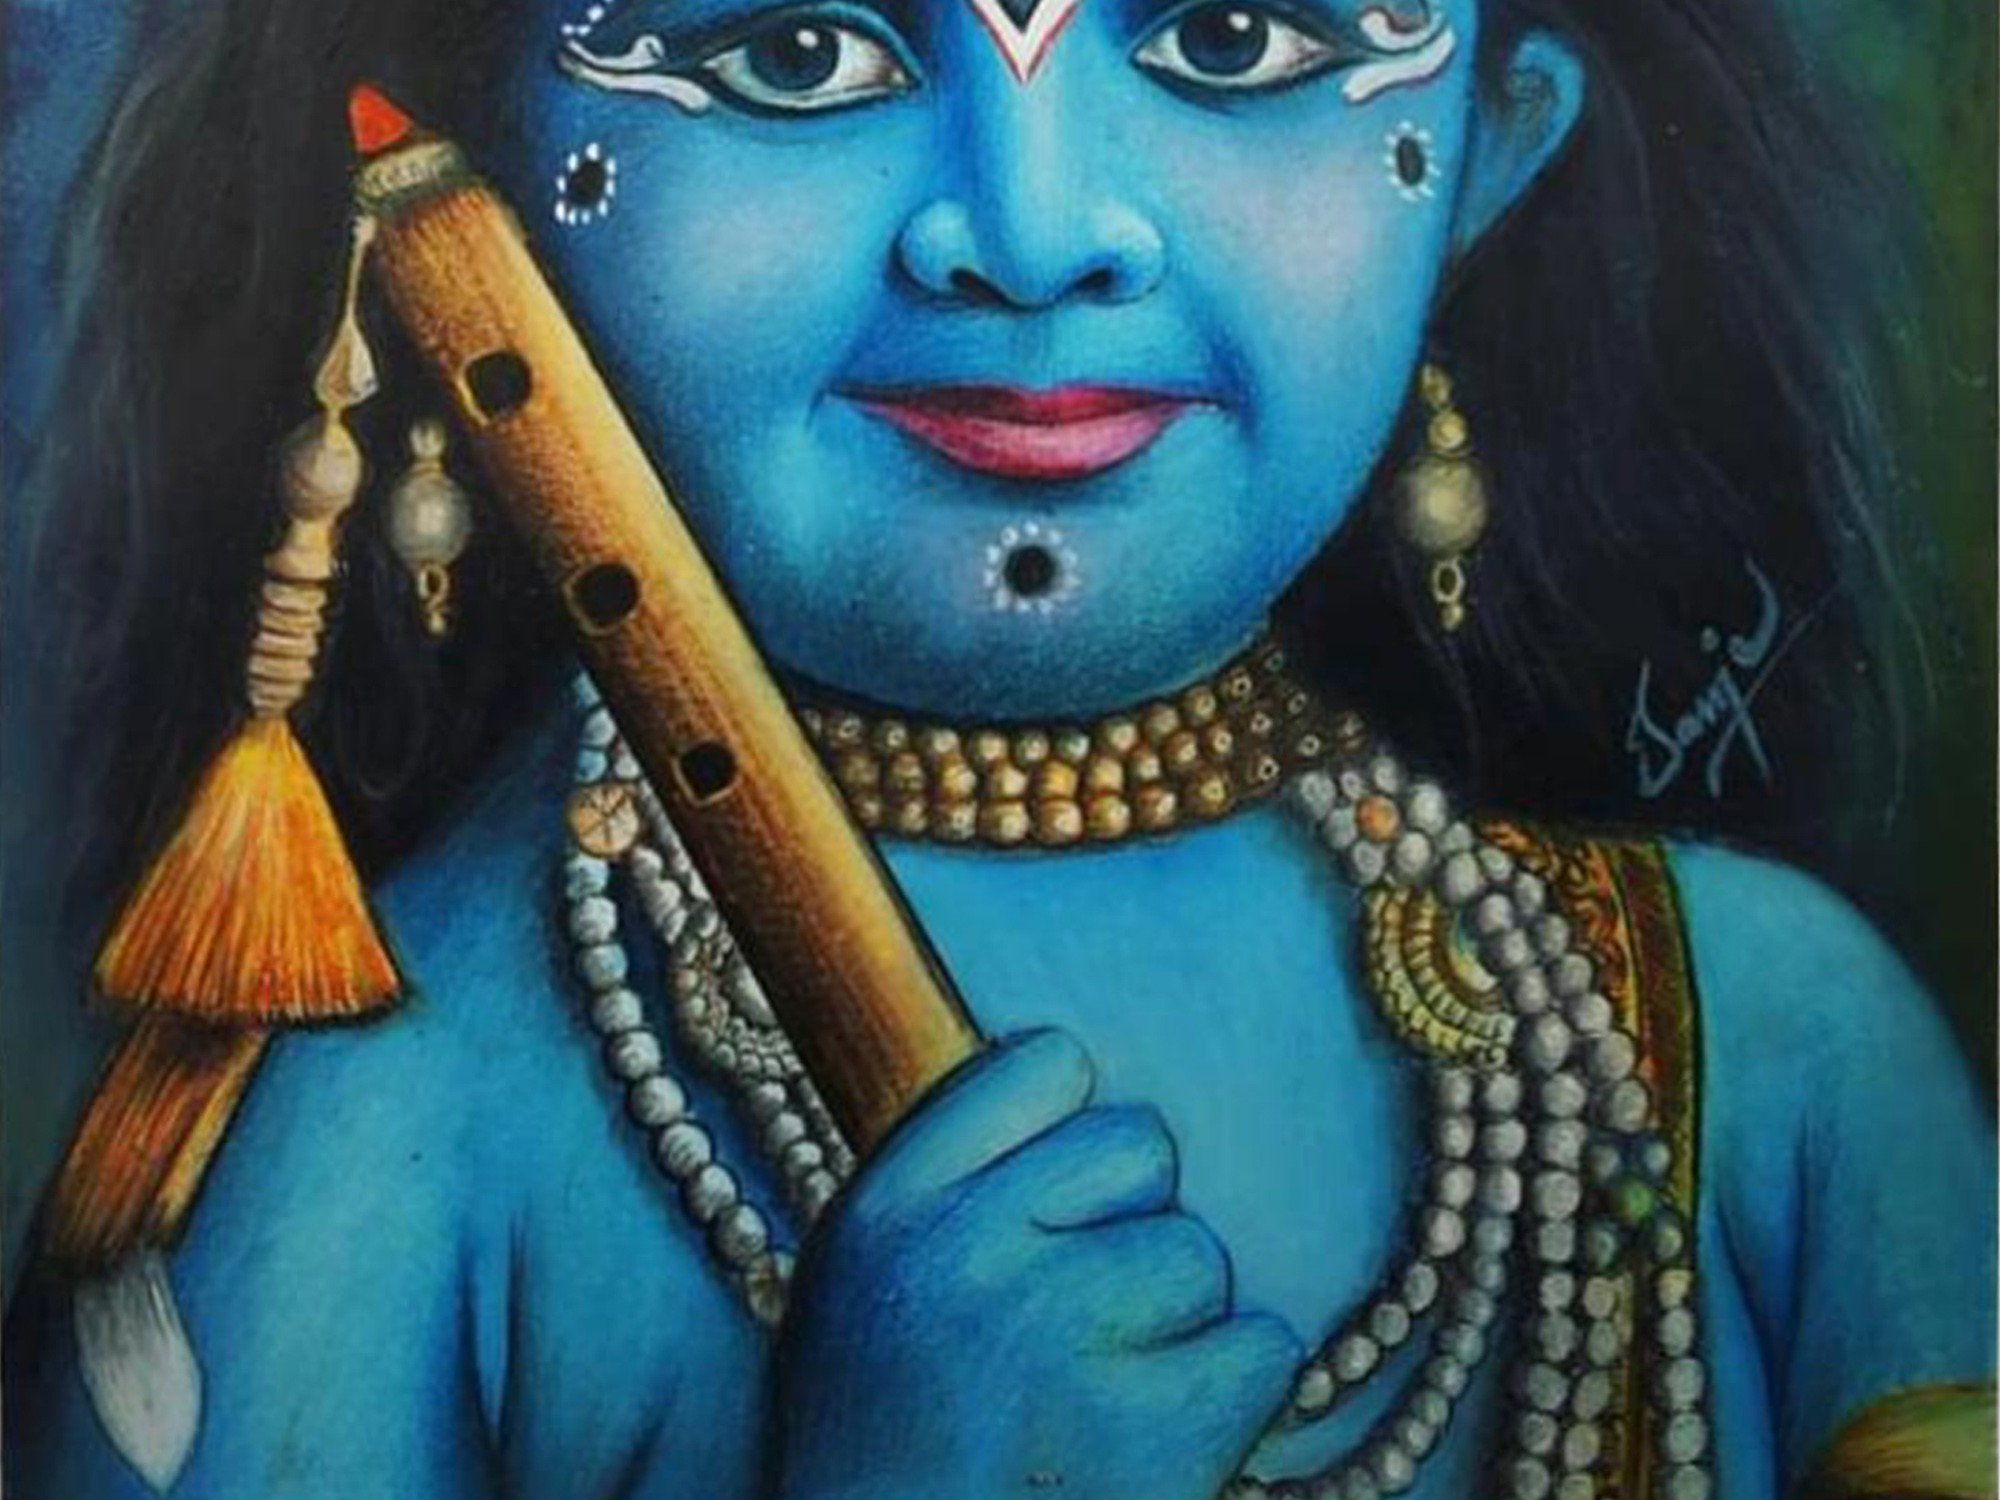 Fine arts club - Published on January 14, 2021 - Radha Krishna drawing with oil  pastel, drawing krishna. - #oilpastel #art #drawing #artist #painting  #artwork #oilpastelart #artistsonfacebook #oilpastels #oilpasteldrawing # sketch #oilpainting ...